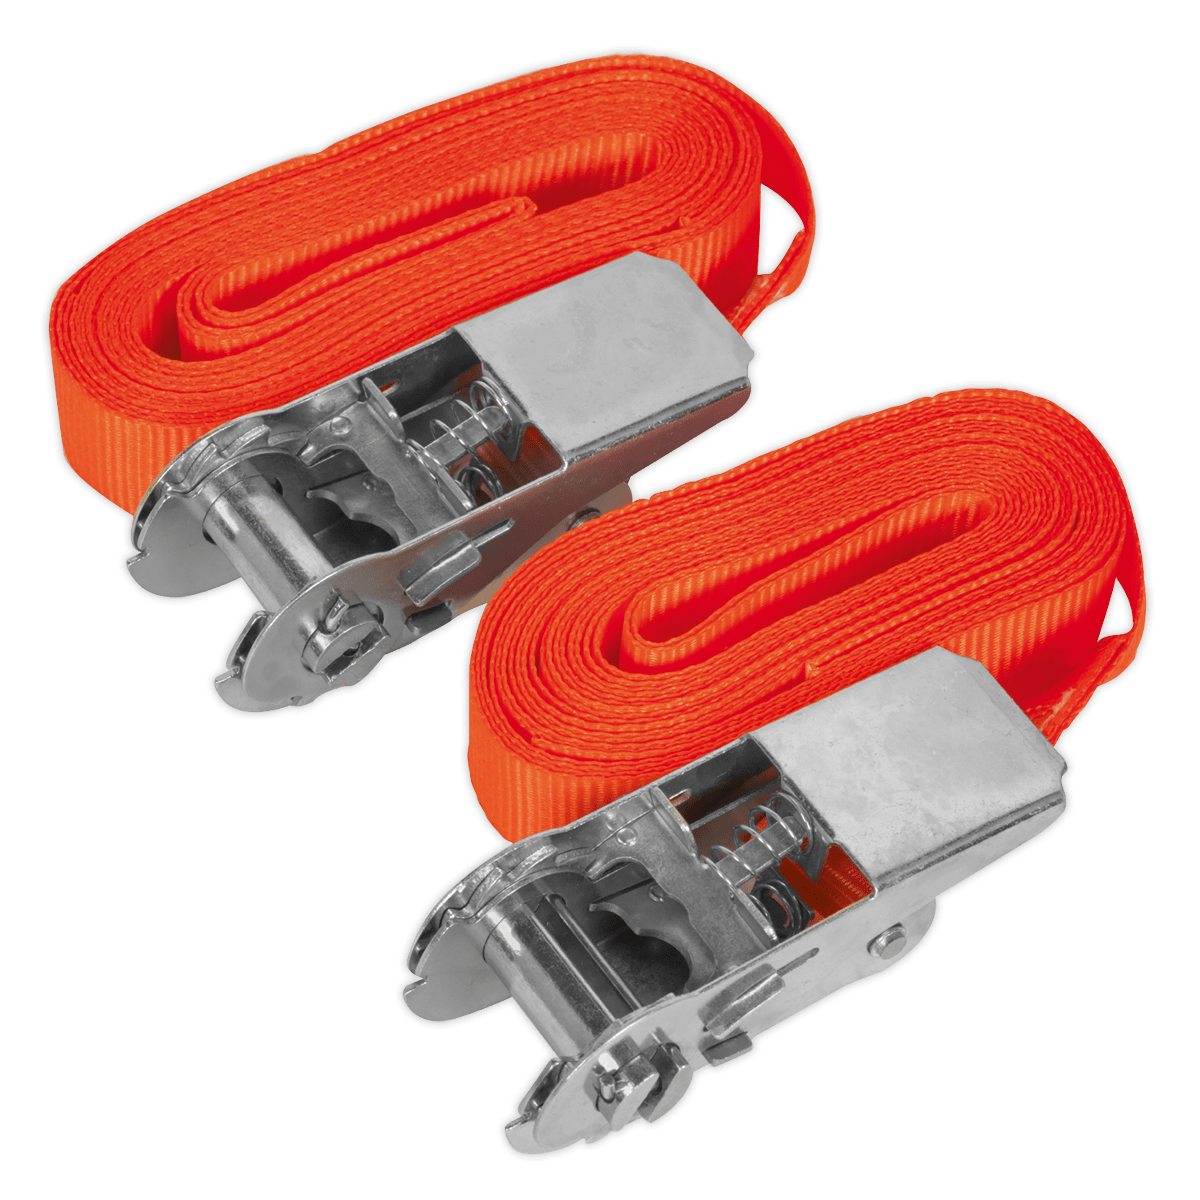 Sealey Self-Securing Ratchet Straps 25mm x 4.5m 500kg Breaking Strength - Pair